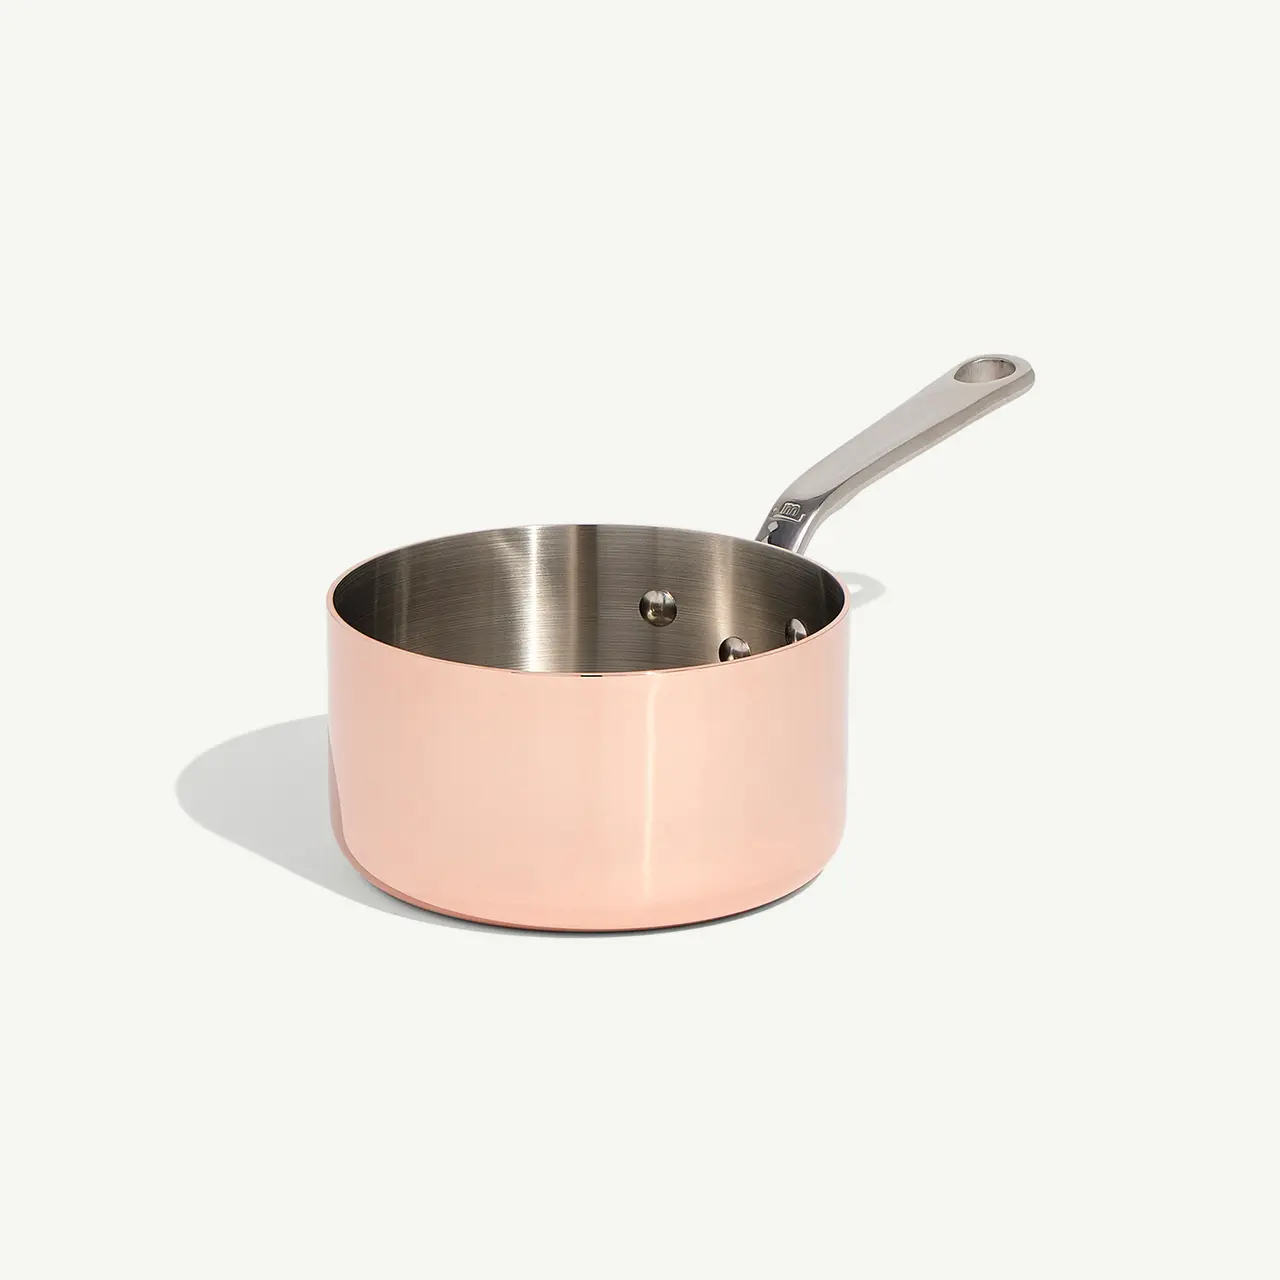 A pink-colored stainless steel saucepan with a long handle set against a light background.